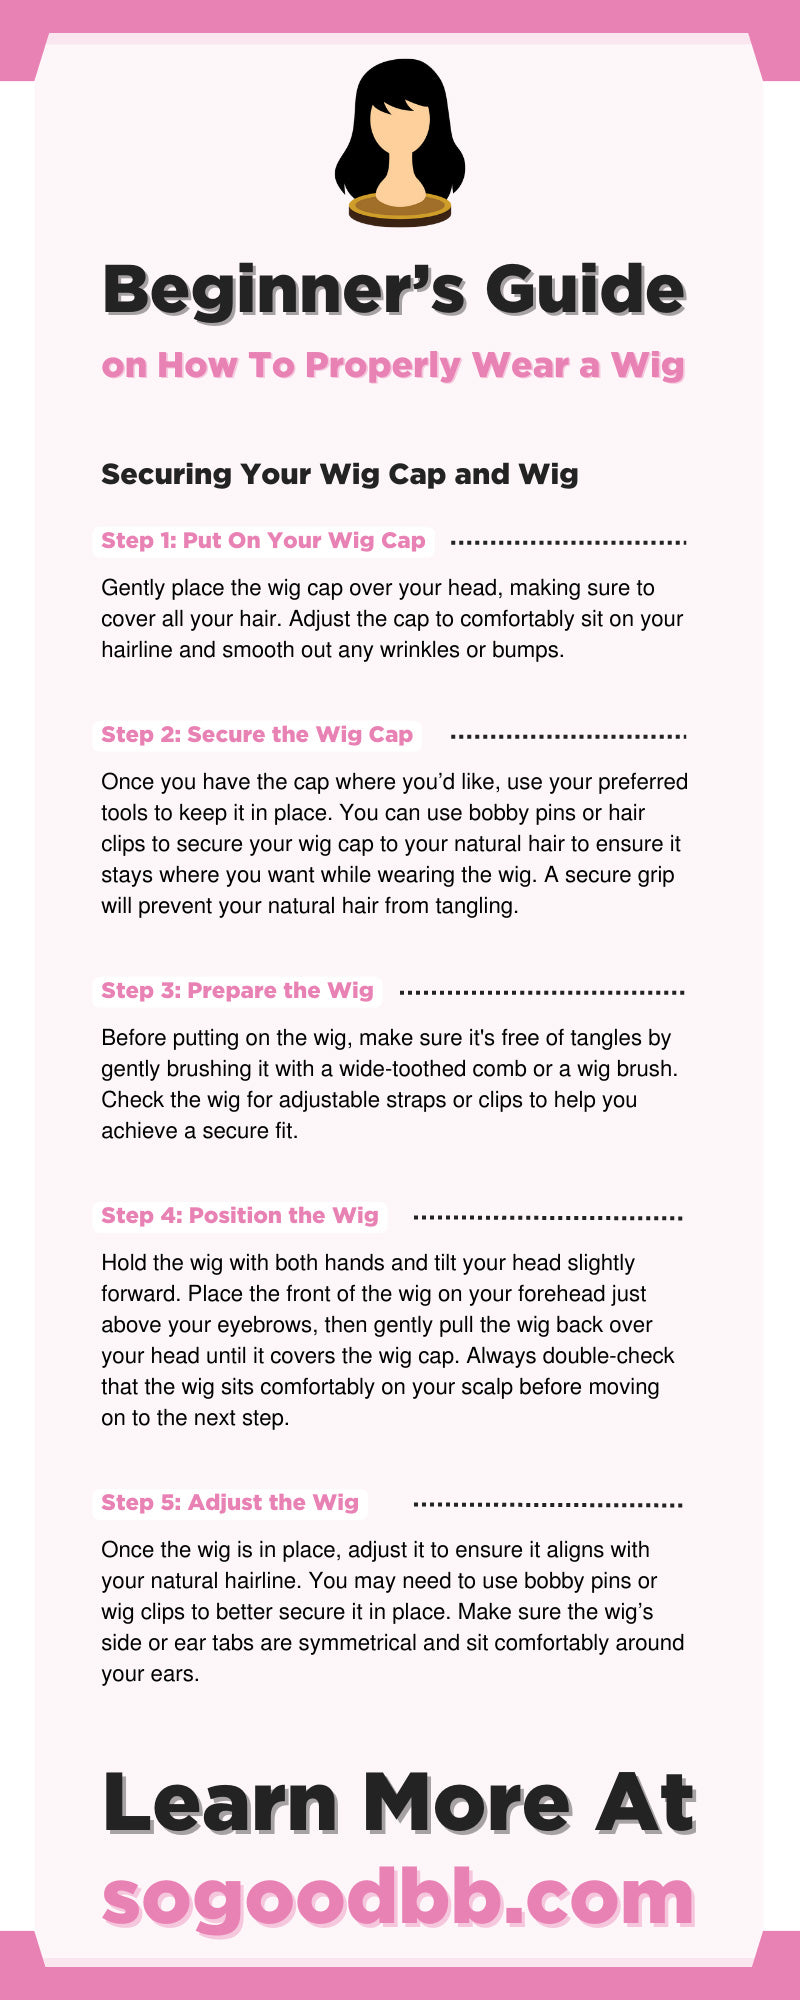 Beginner’s Guide on How To Properly Wear a Wig